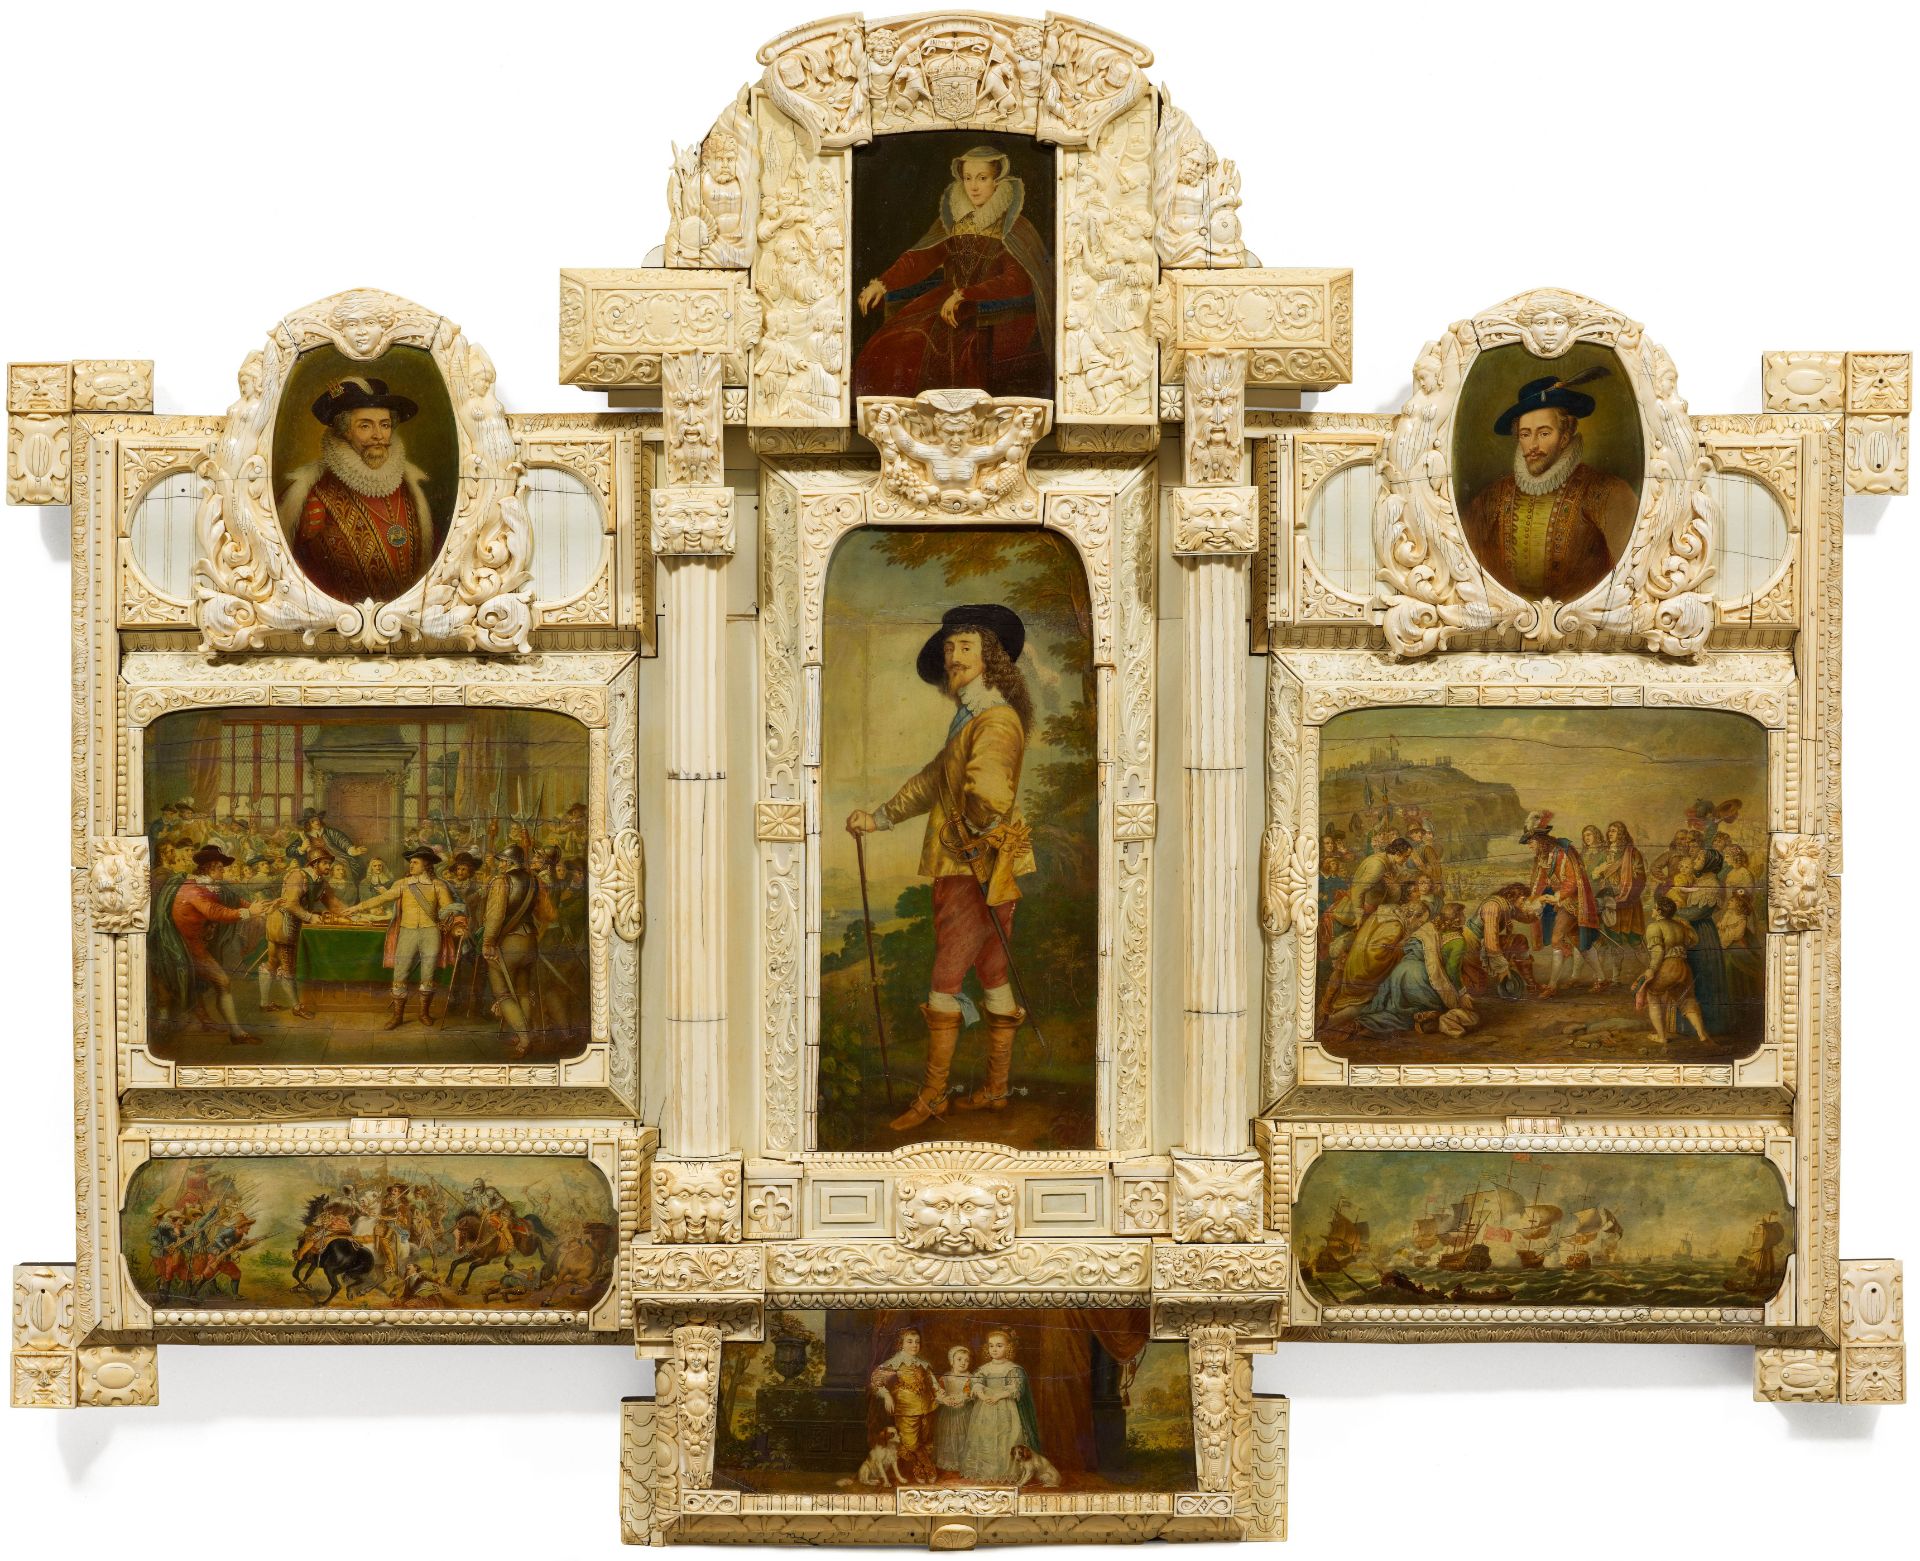 LARGE PICTORIAL PANEL WITH SCENES FROM THE HISTORY OF ENGLAND